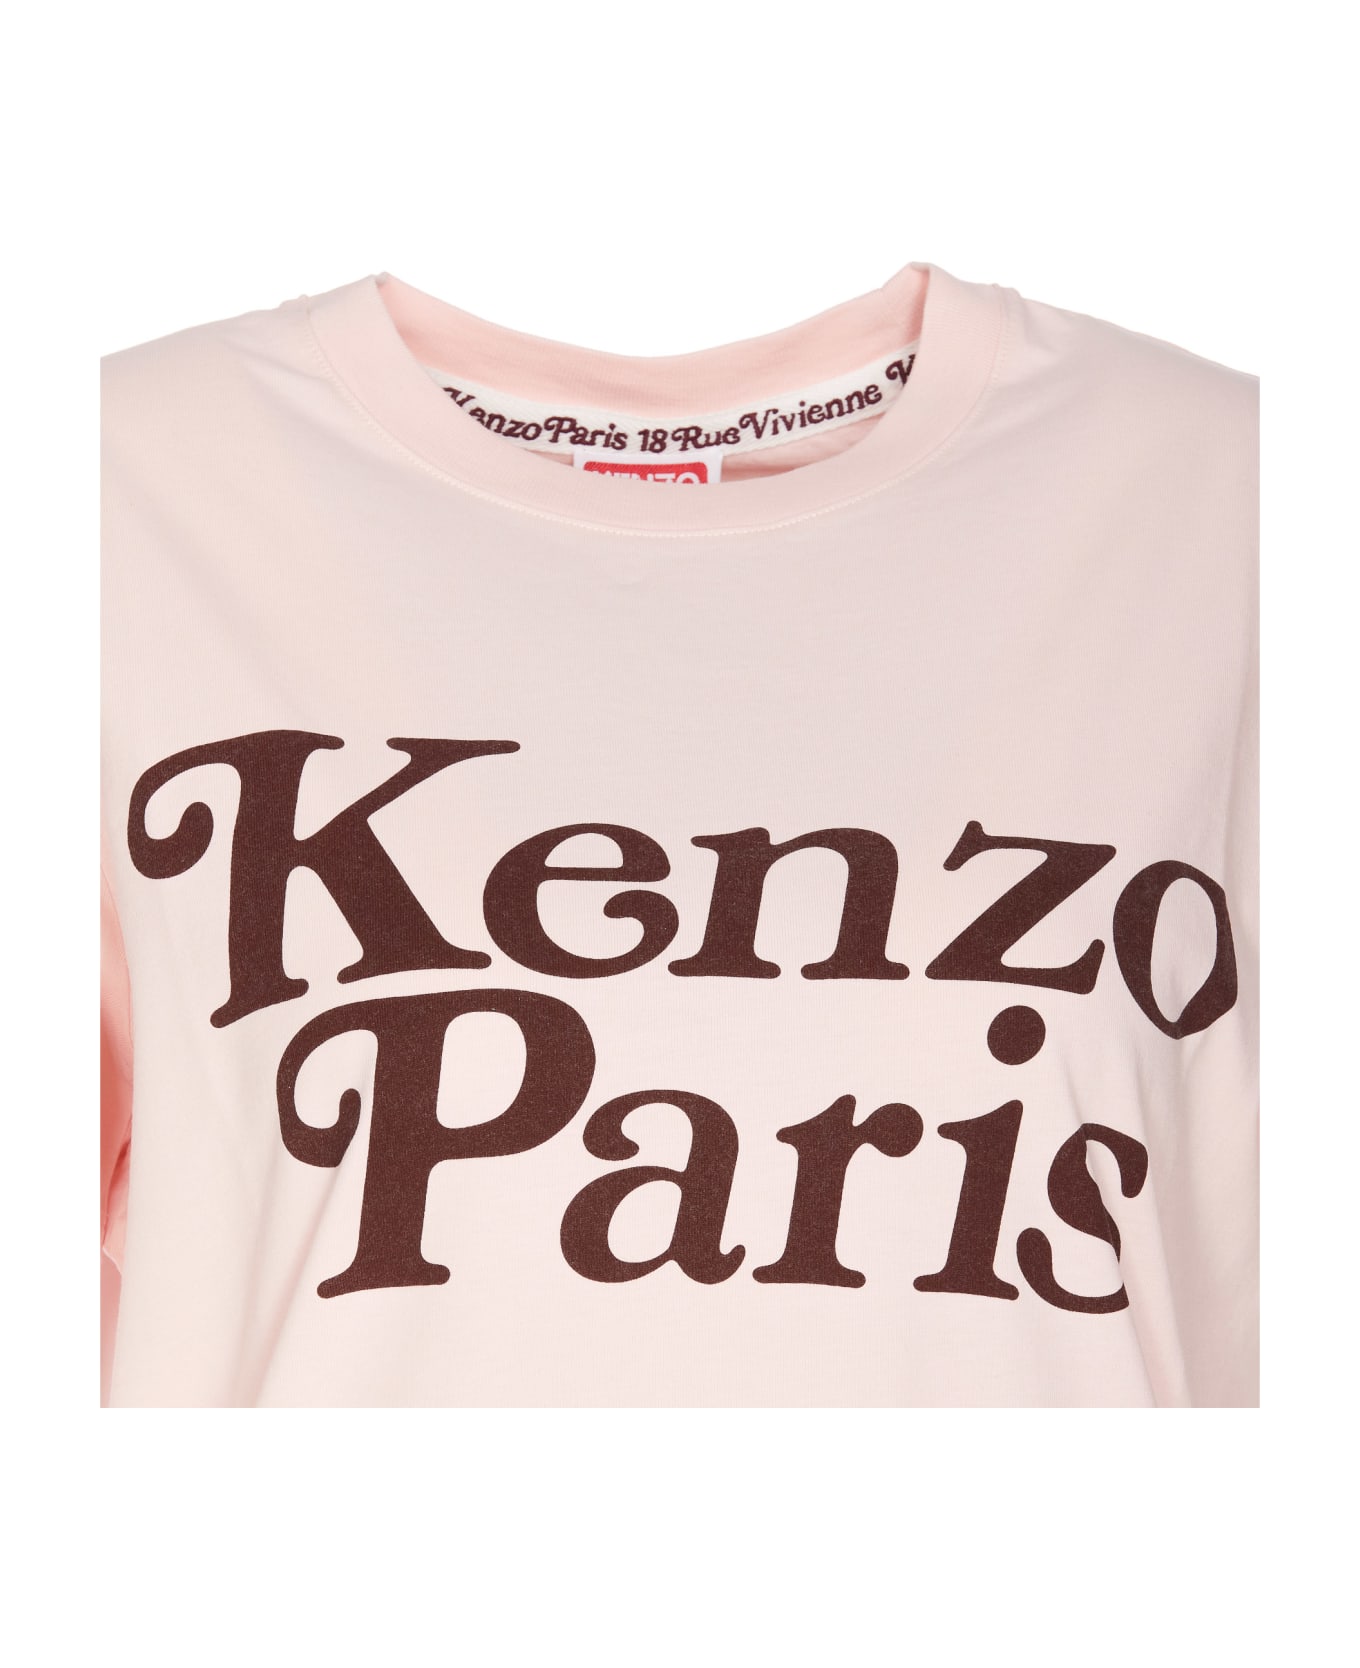 Kenzo By Verdy T-shirt - Faded pink Tシャツ